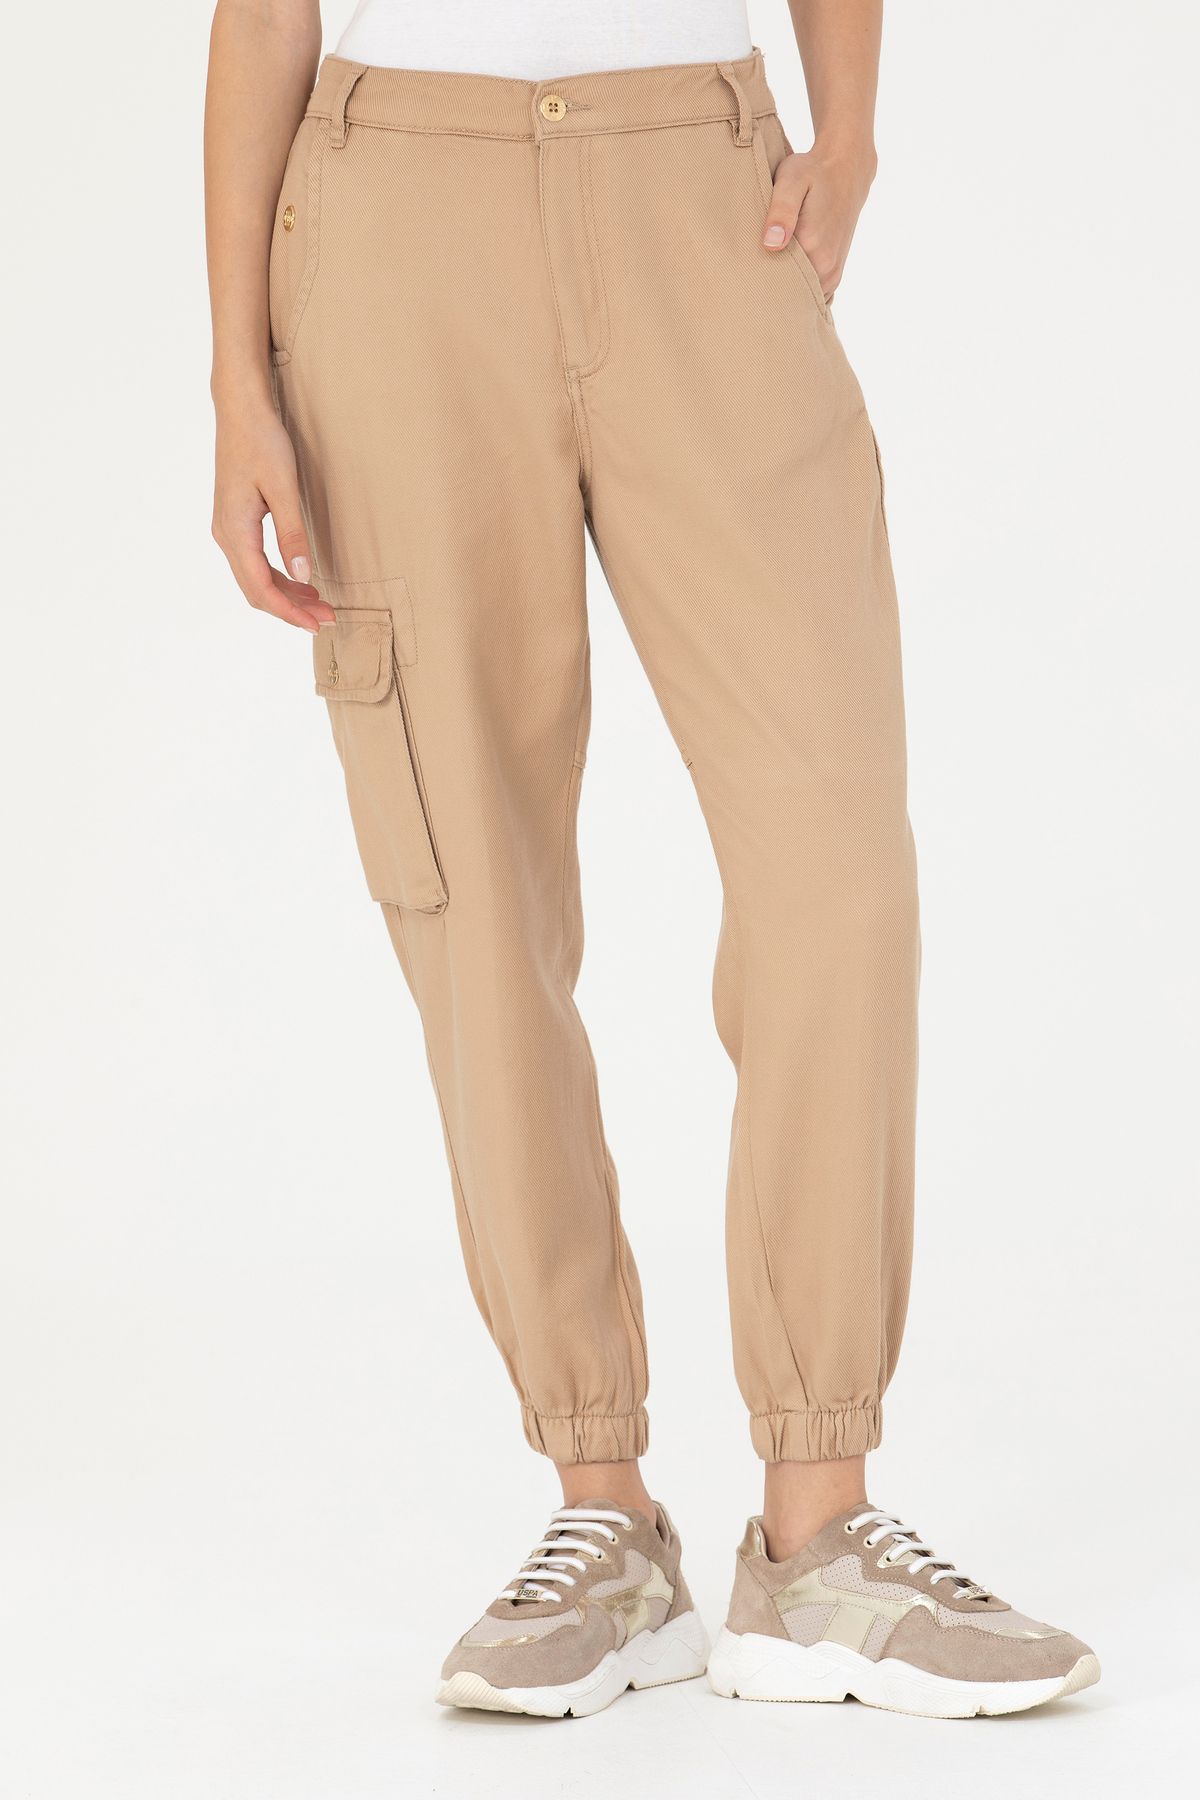 Other US Polo Assn Khaki Colored Cargo Pants Size 32x30 R2 | Grailed